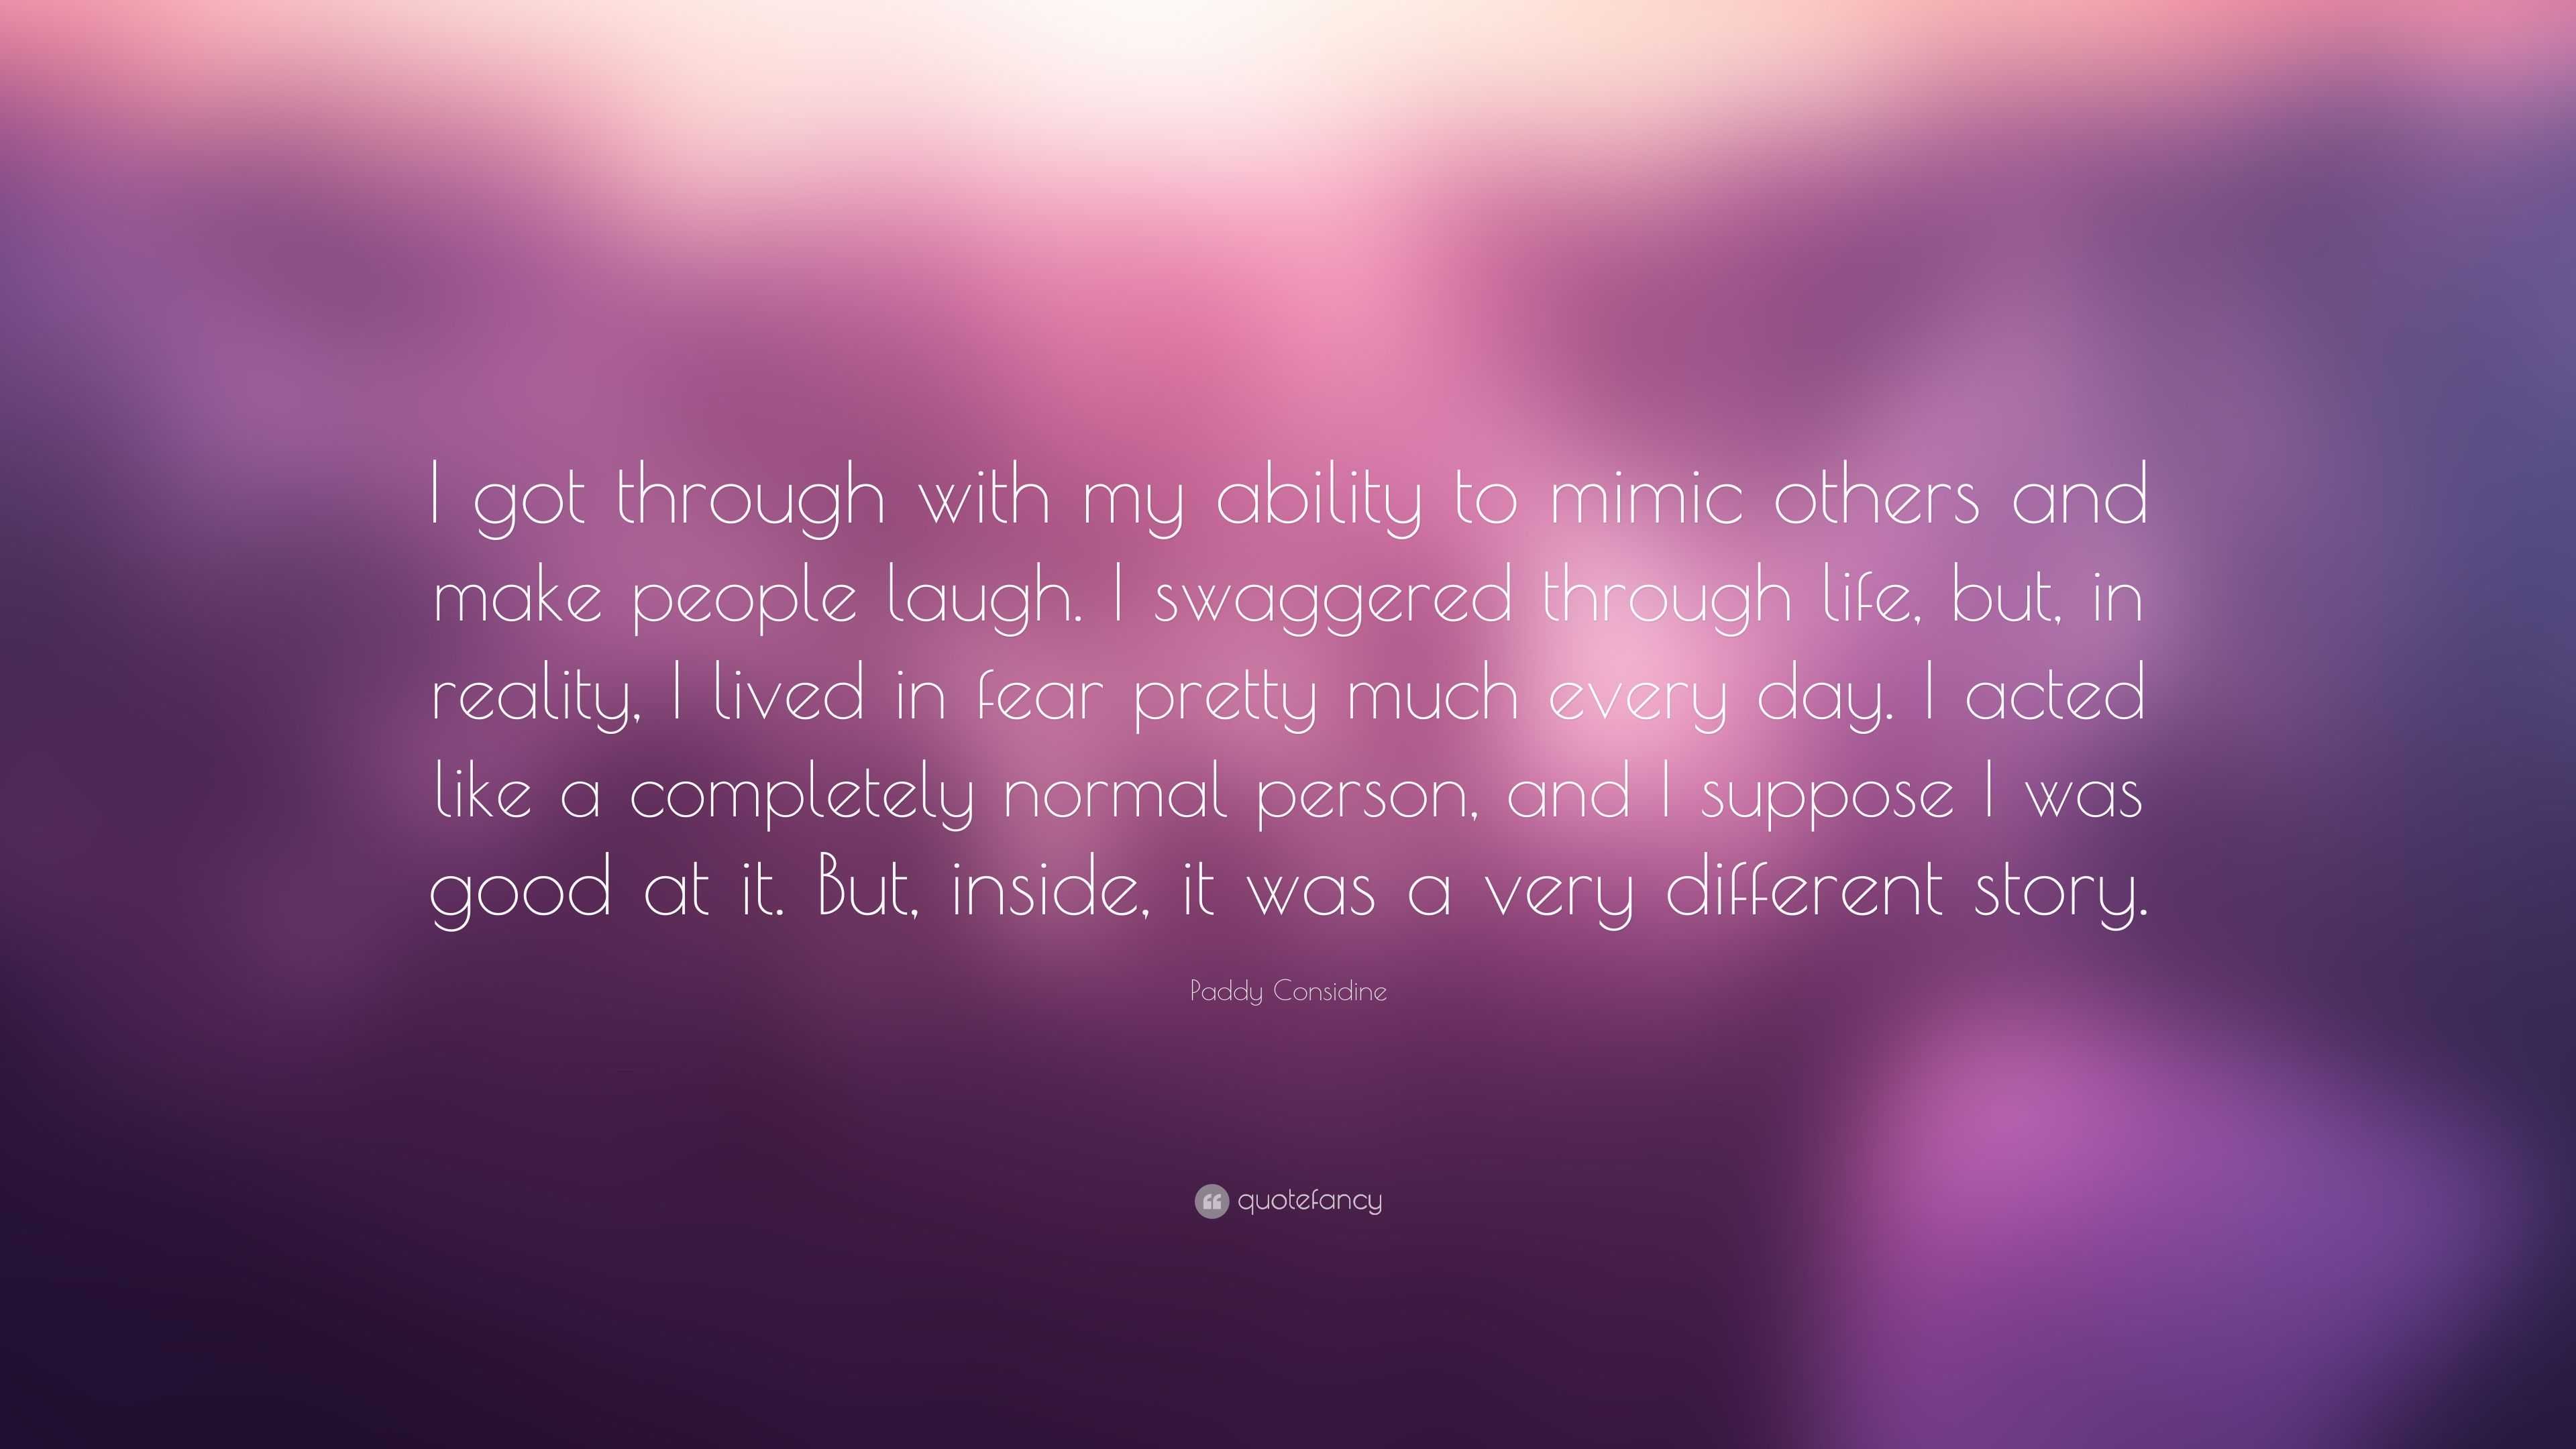 Paddy Considine Quote: “I got through with my ability to mimic others ...